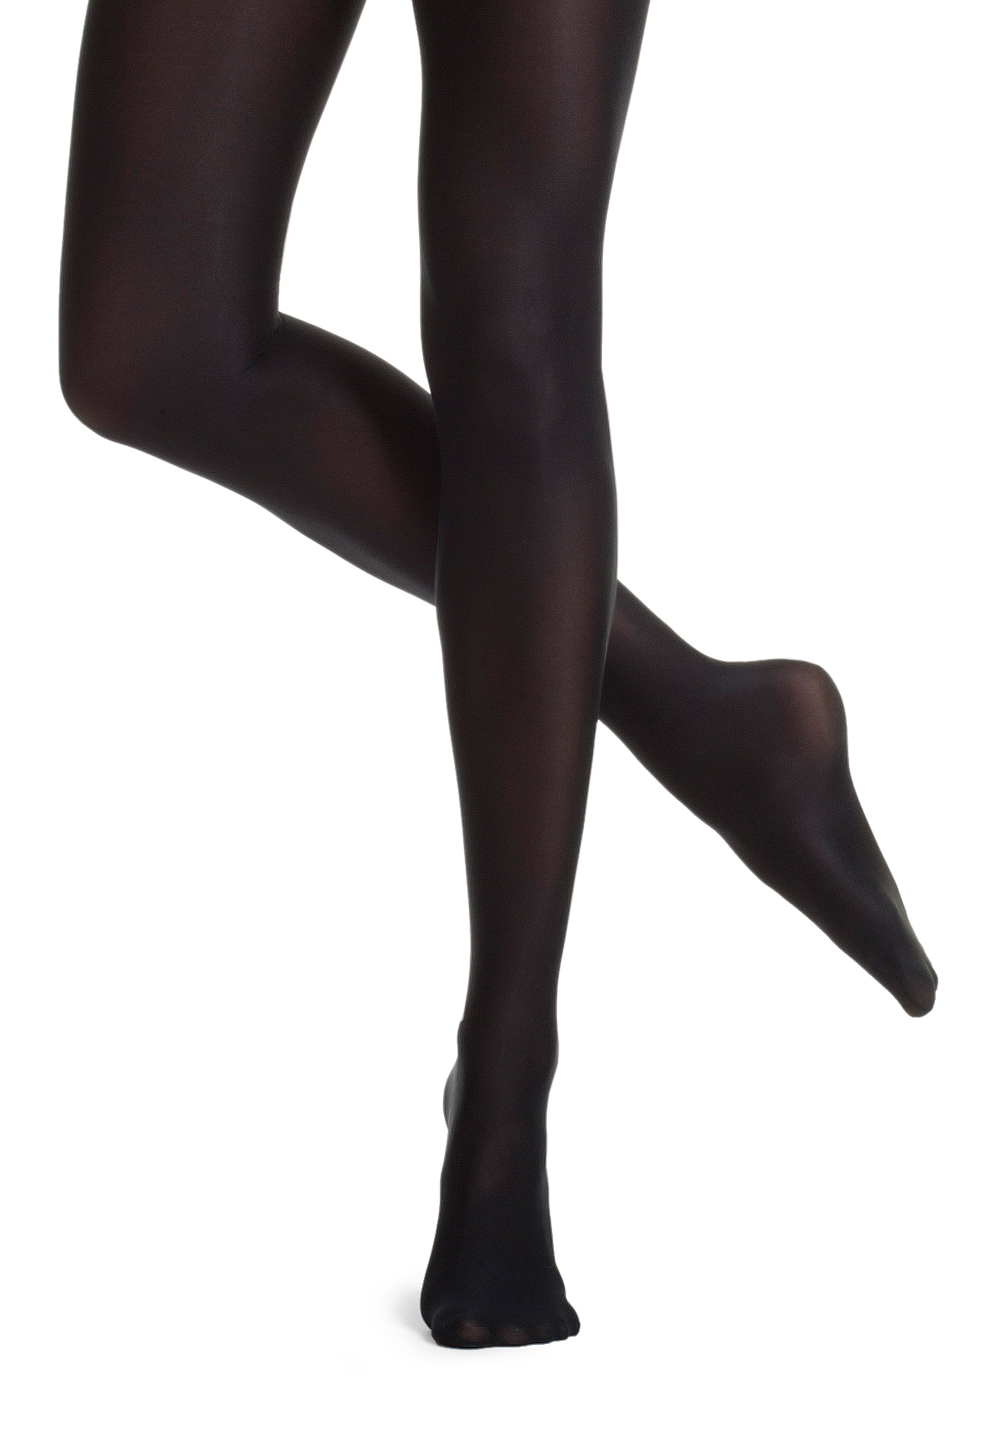 Tights - Danskin Ultra Shimmery Footed Tights